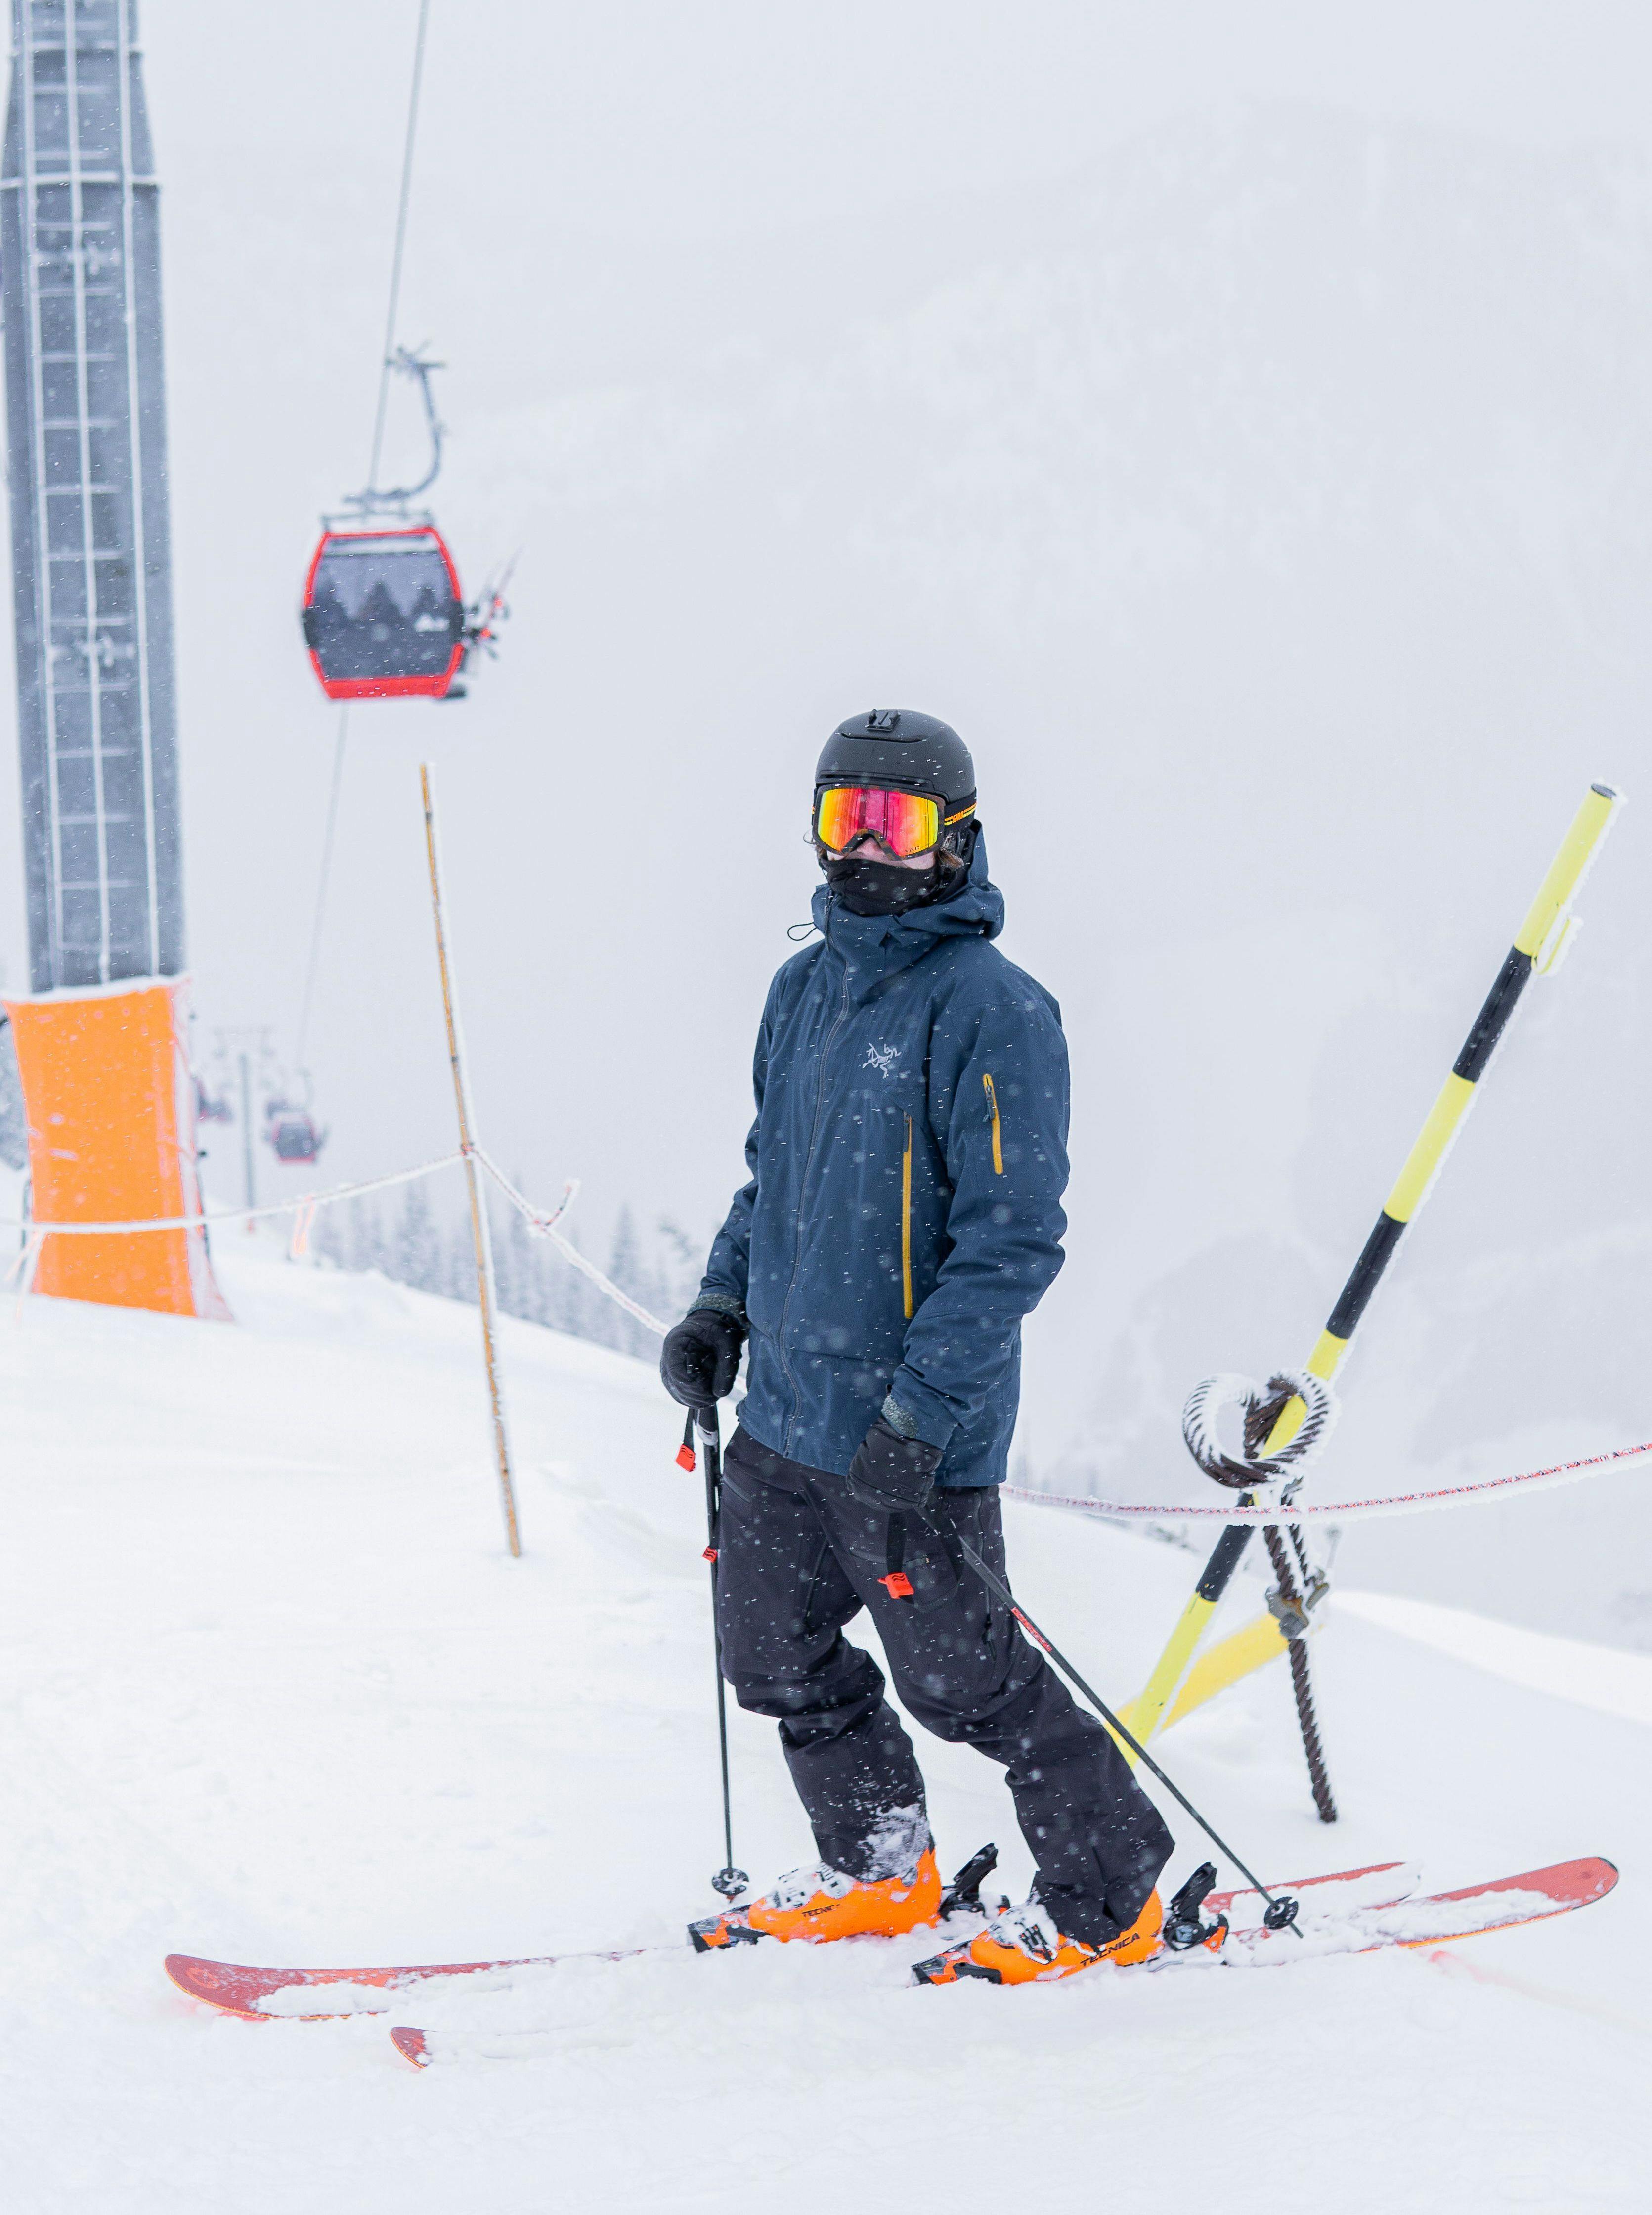 Someone looks at the camera while on skis, wearing a helmet and goggles. Behind them, we can see a gondola run. 